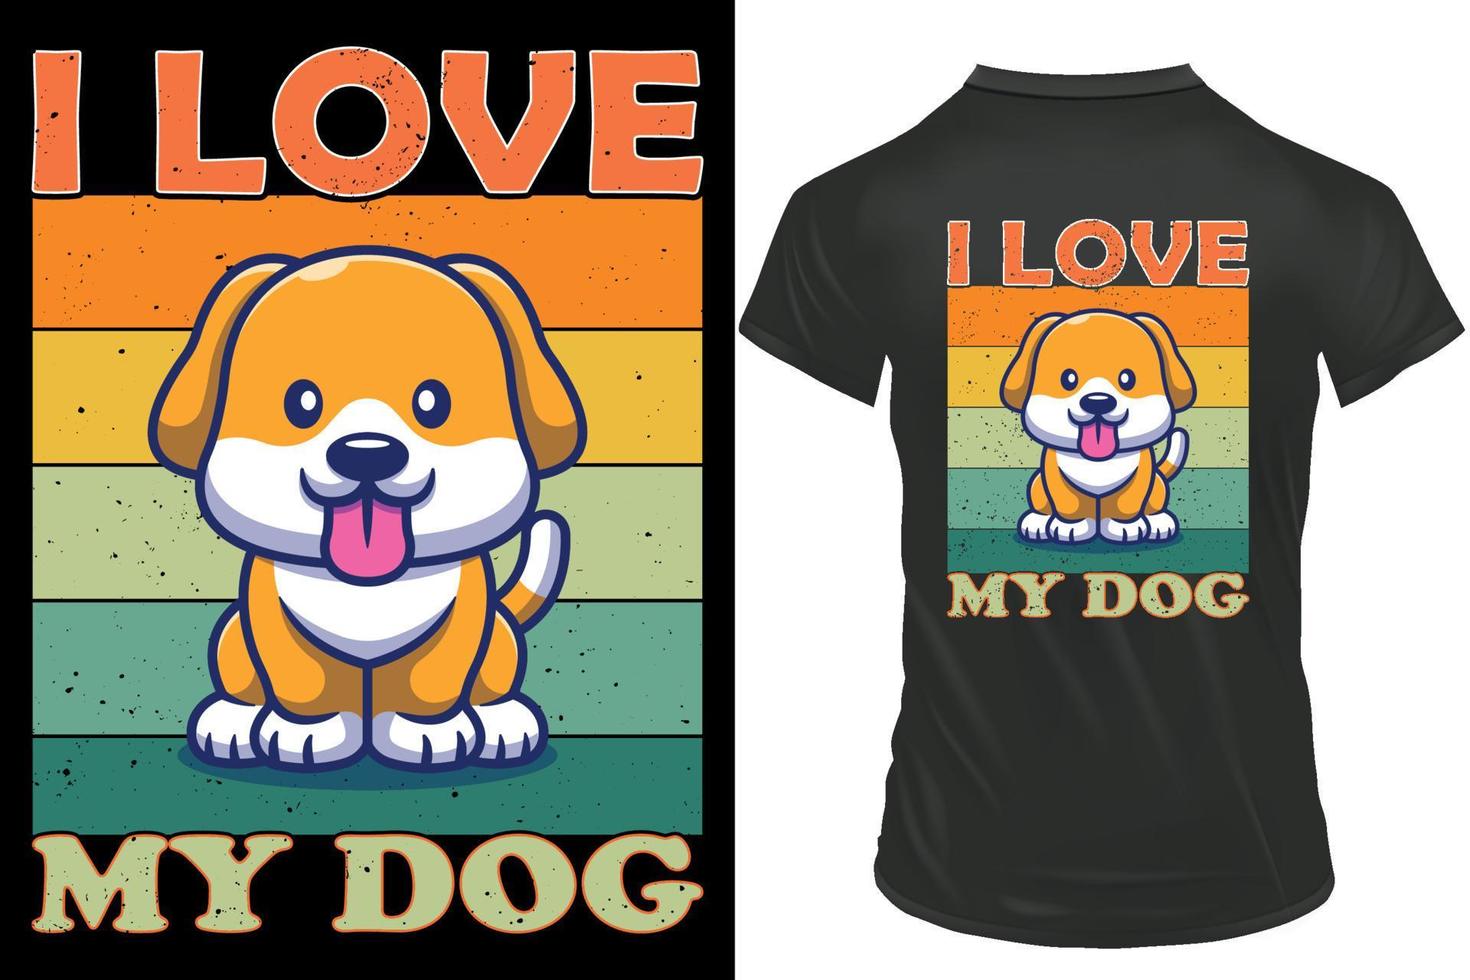 I love My Dog Retro vintage t shirt design with dog vector. vector